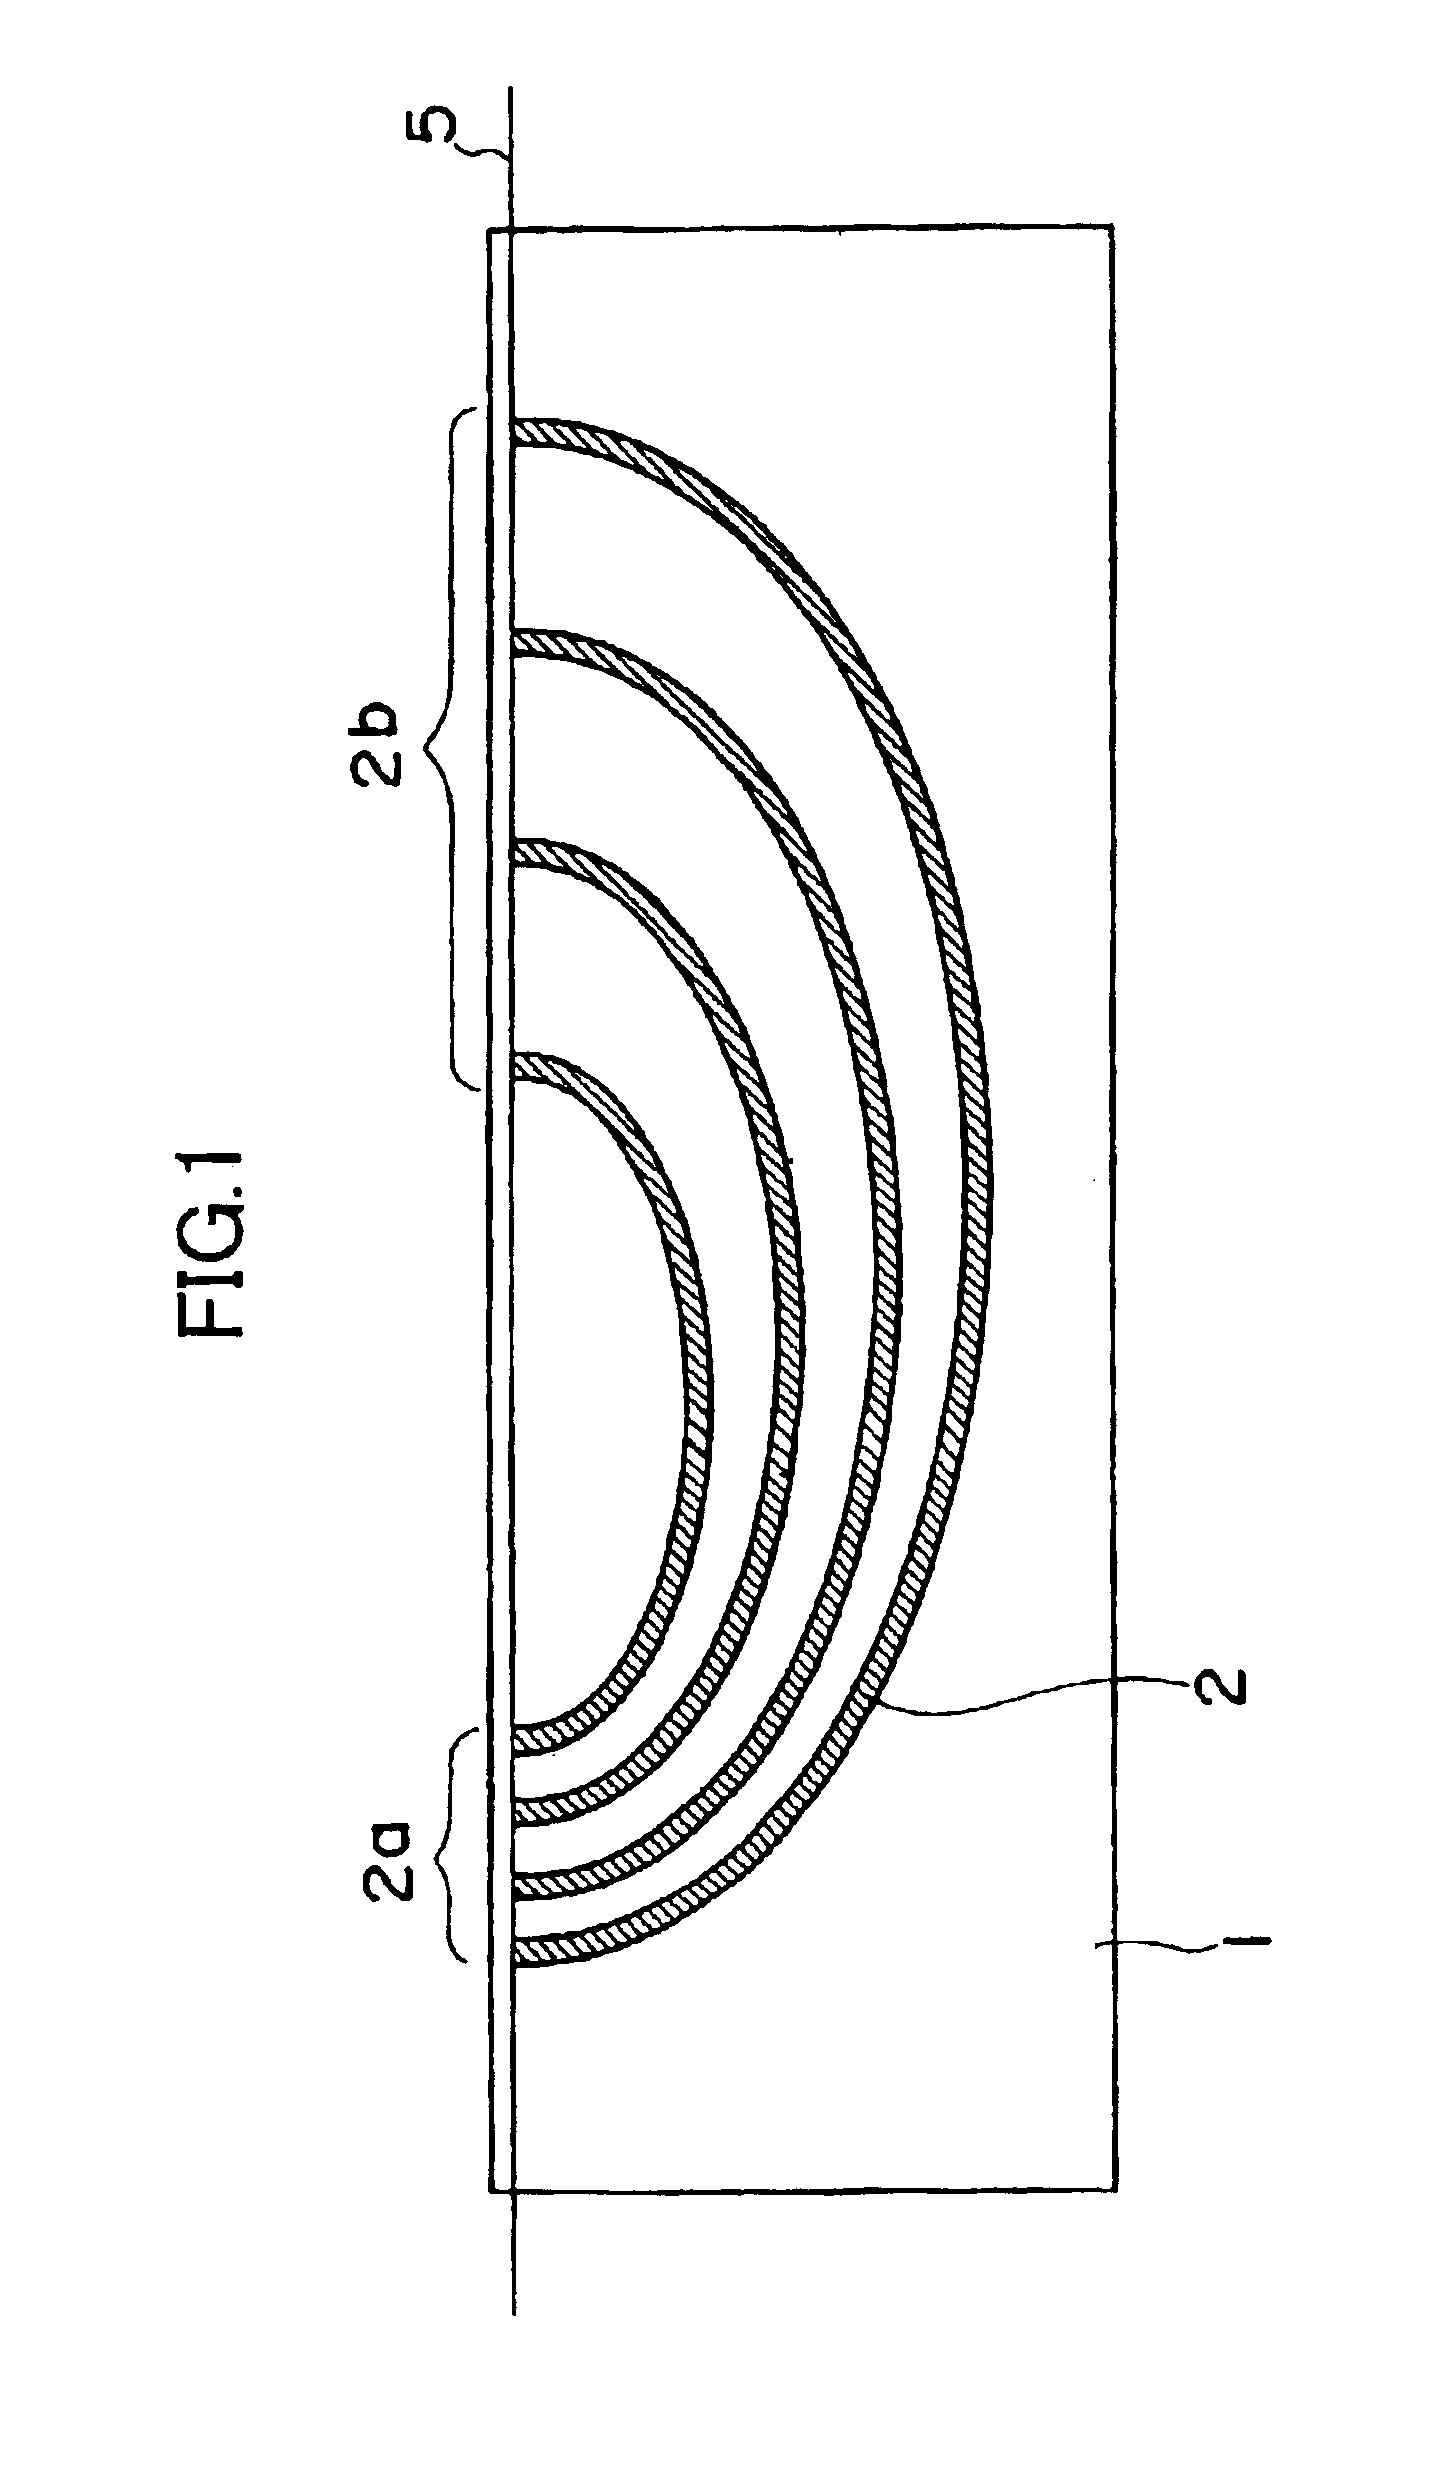 Polymer optical waveguide and process for producing the same